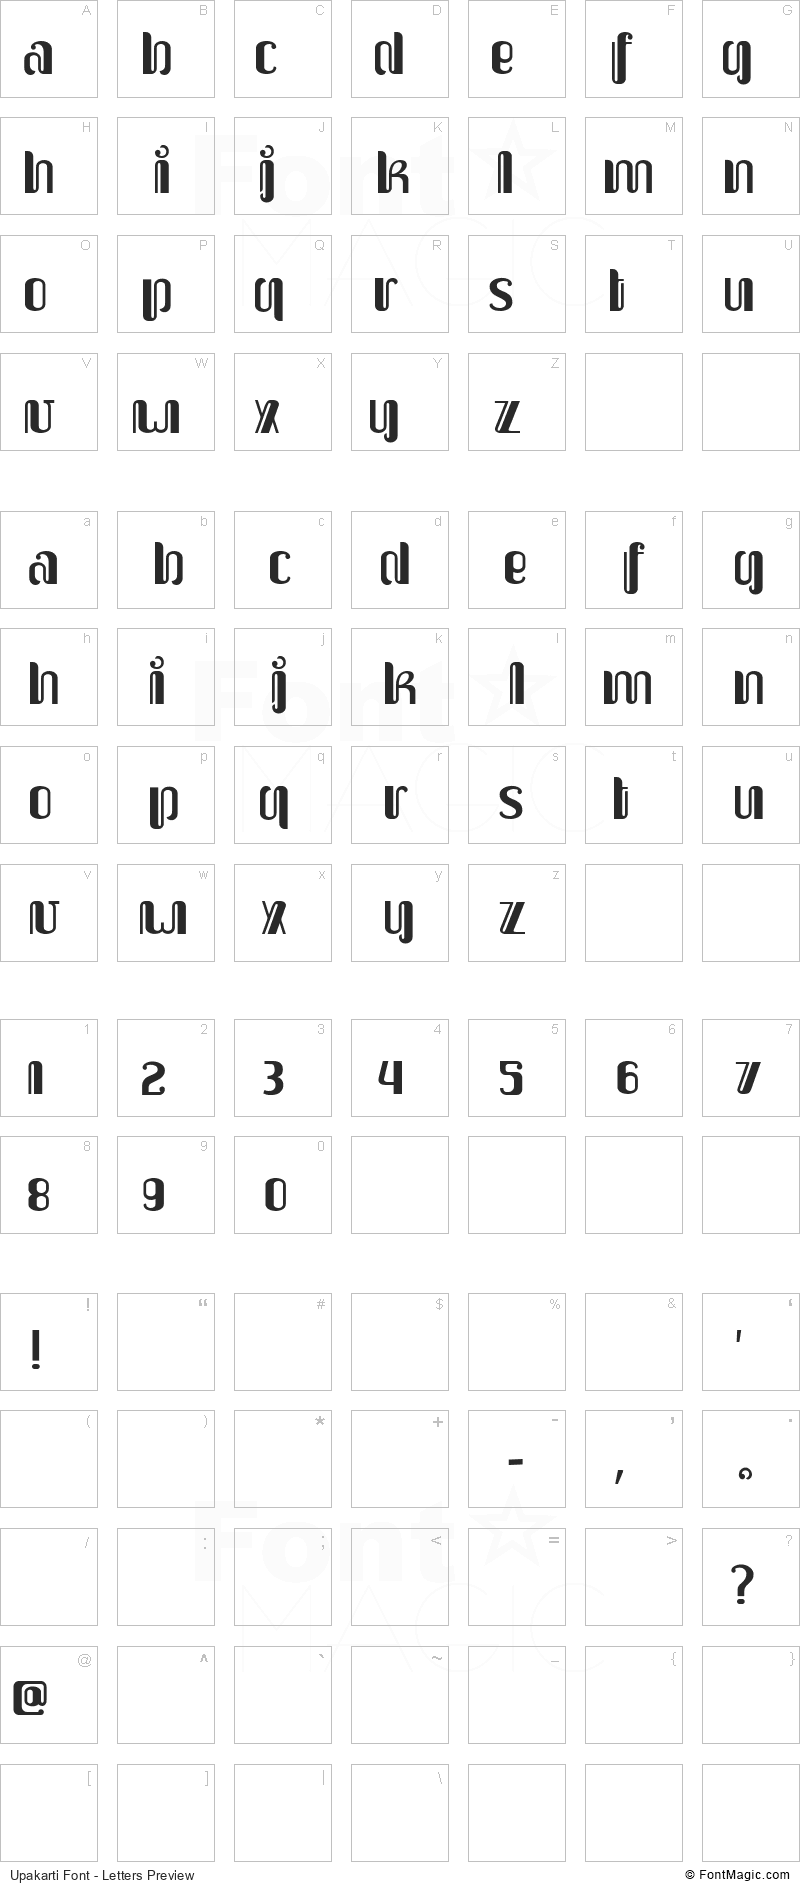 Upakarti Font - All Latters Preview Chart